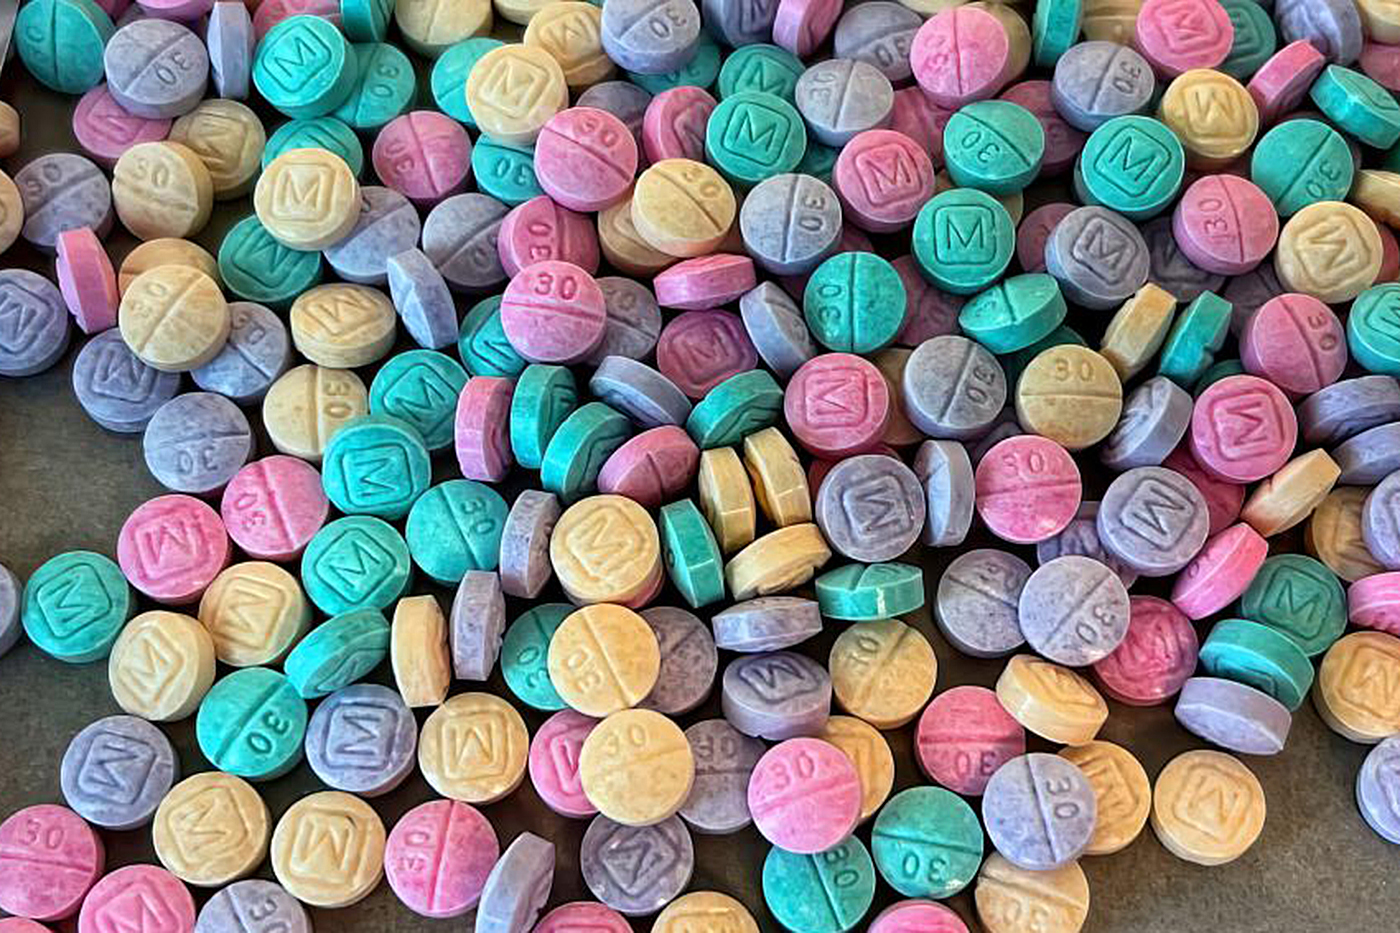 Rainbow fentanyl pills all splayed out